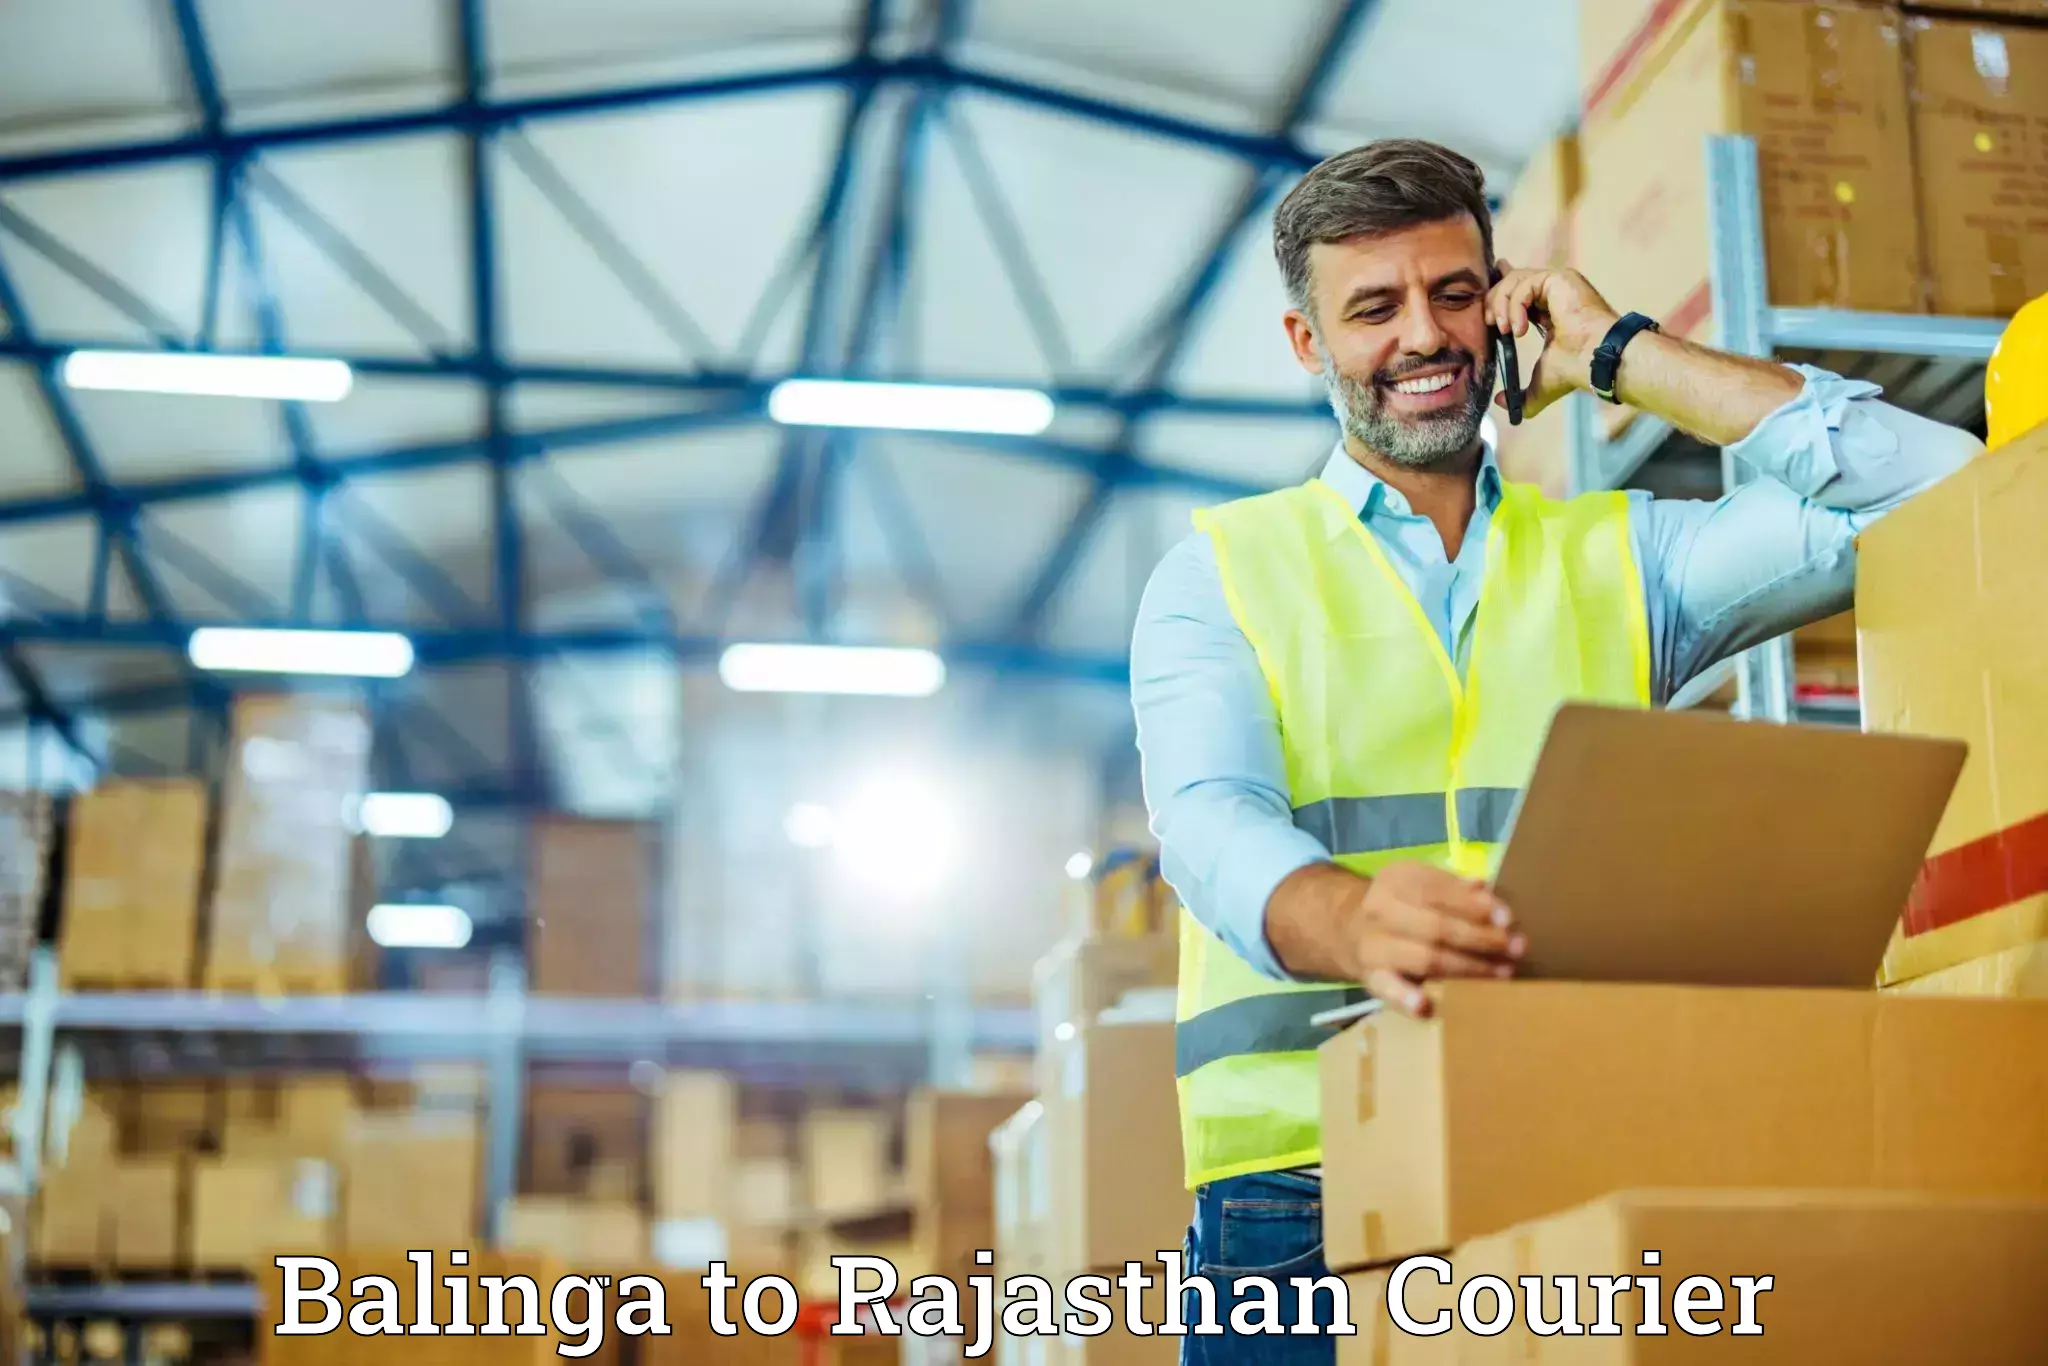 Quality relocation assistance Balinga to Rajasthan